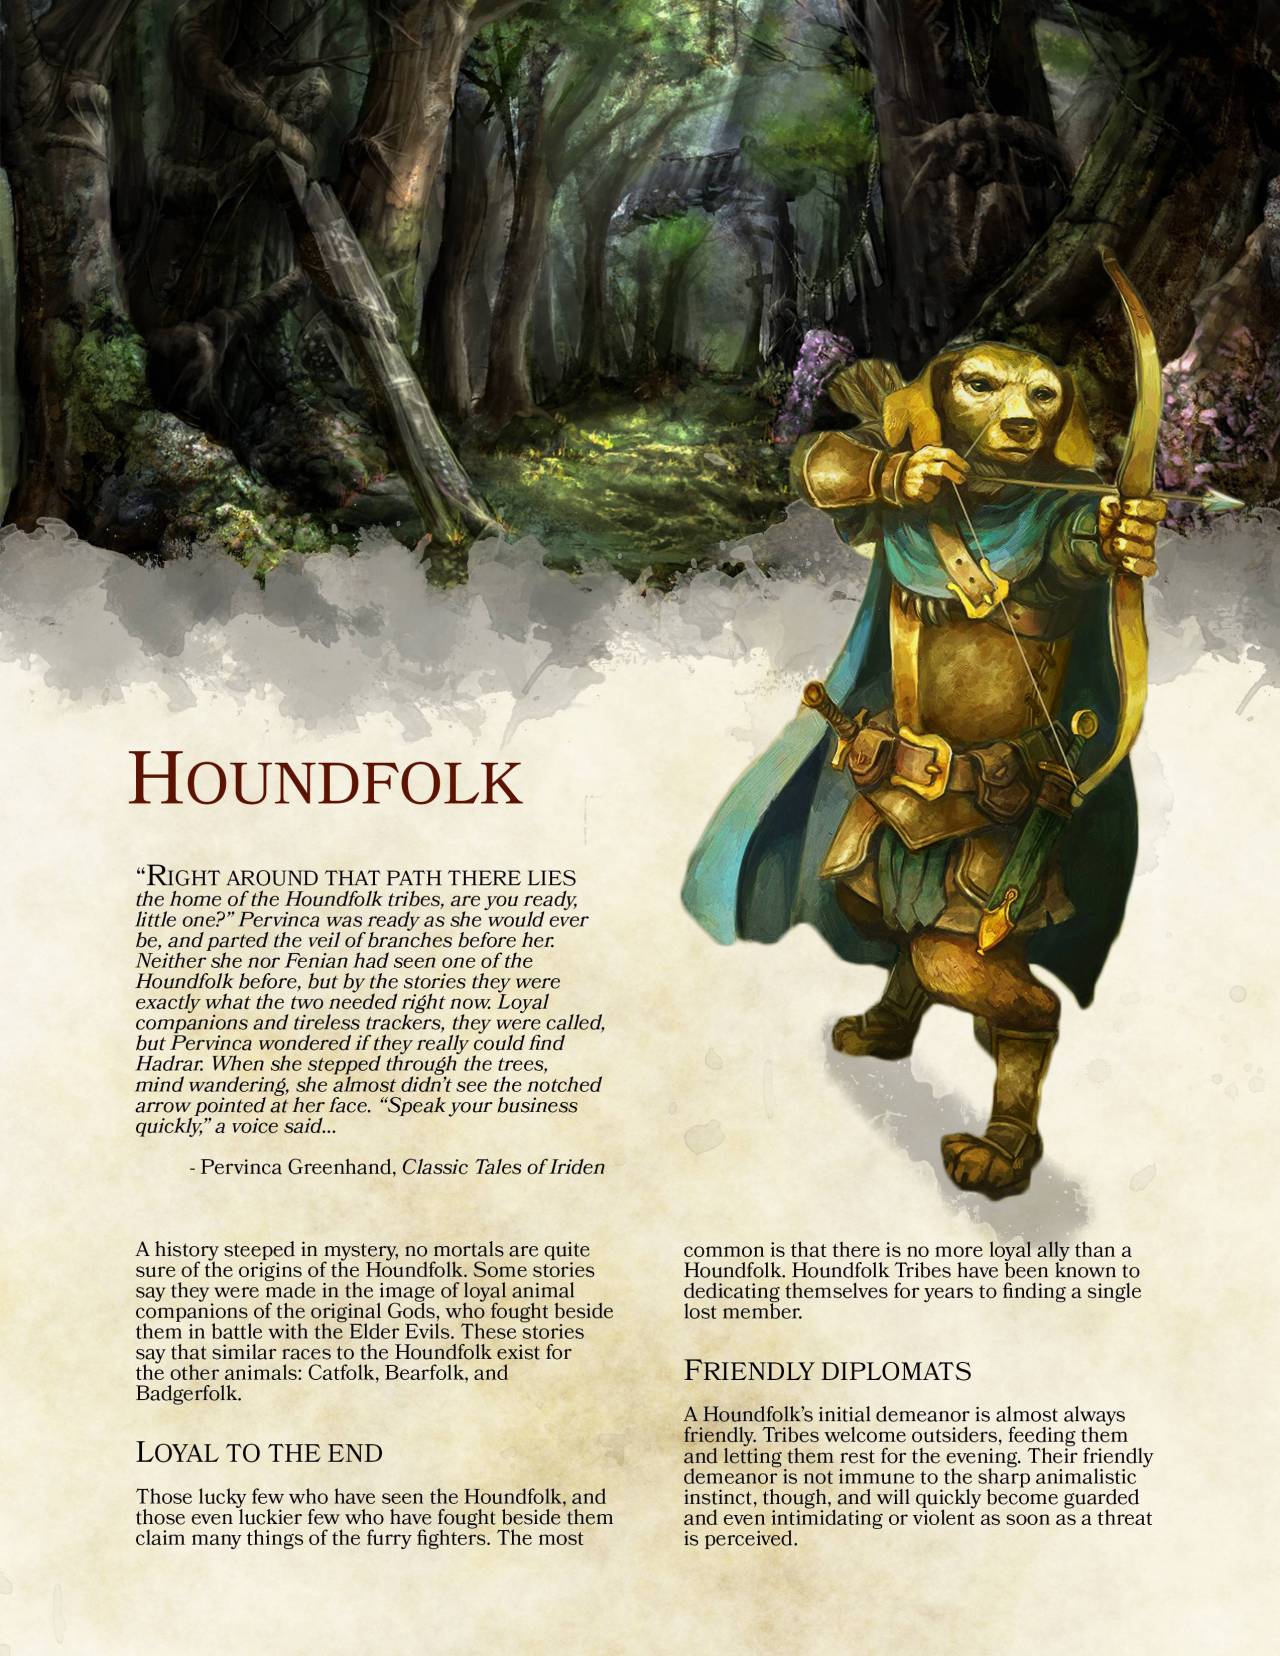 odnd 5e character builder